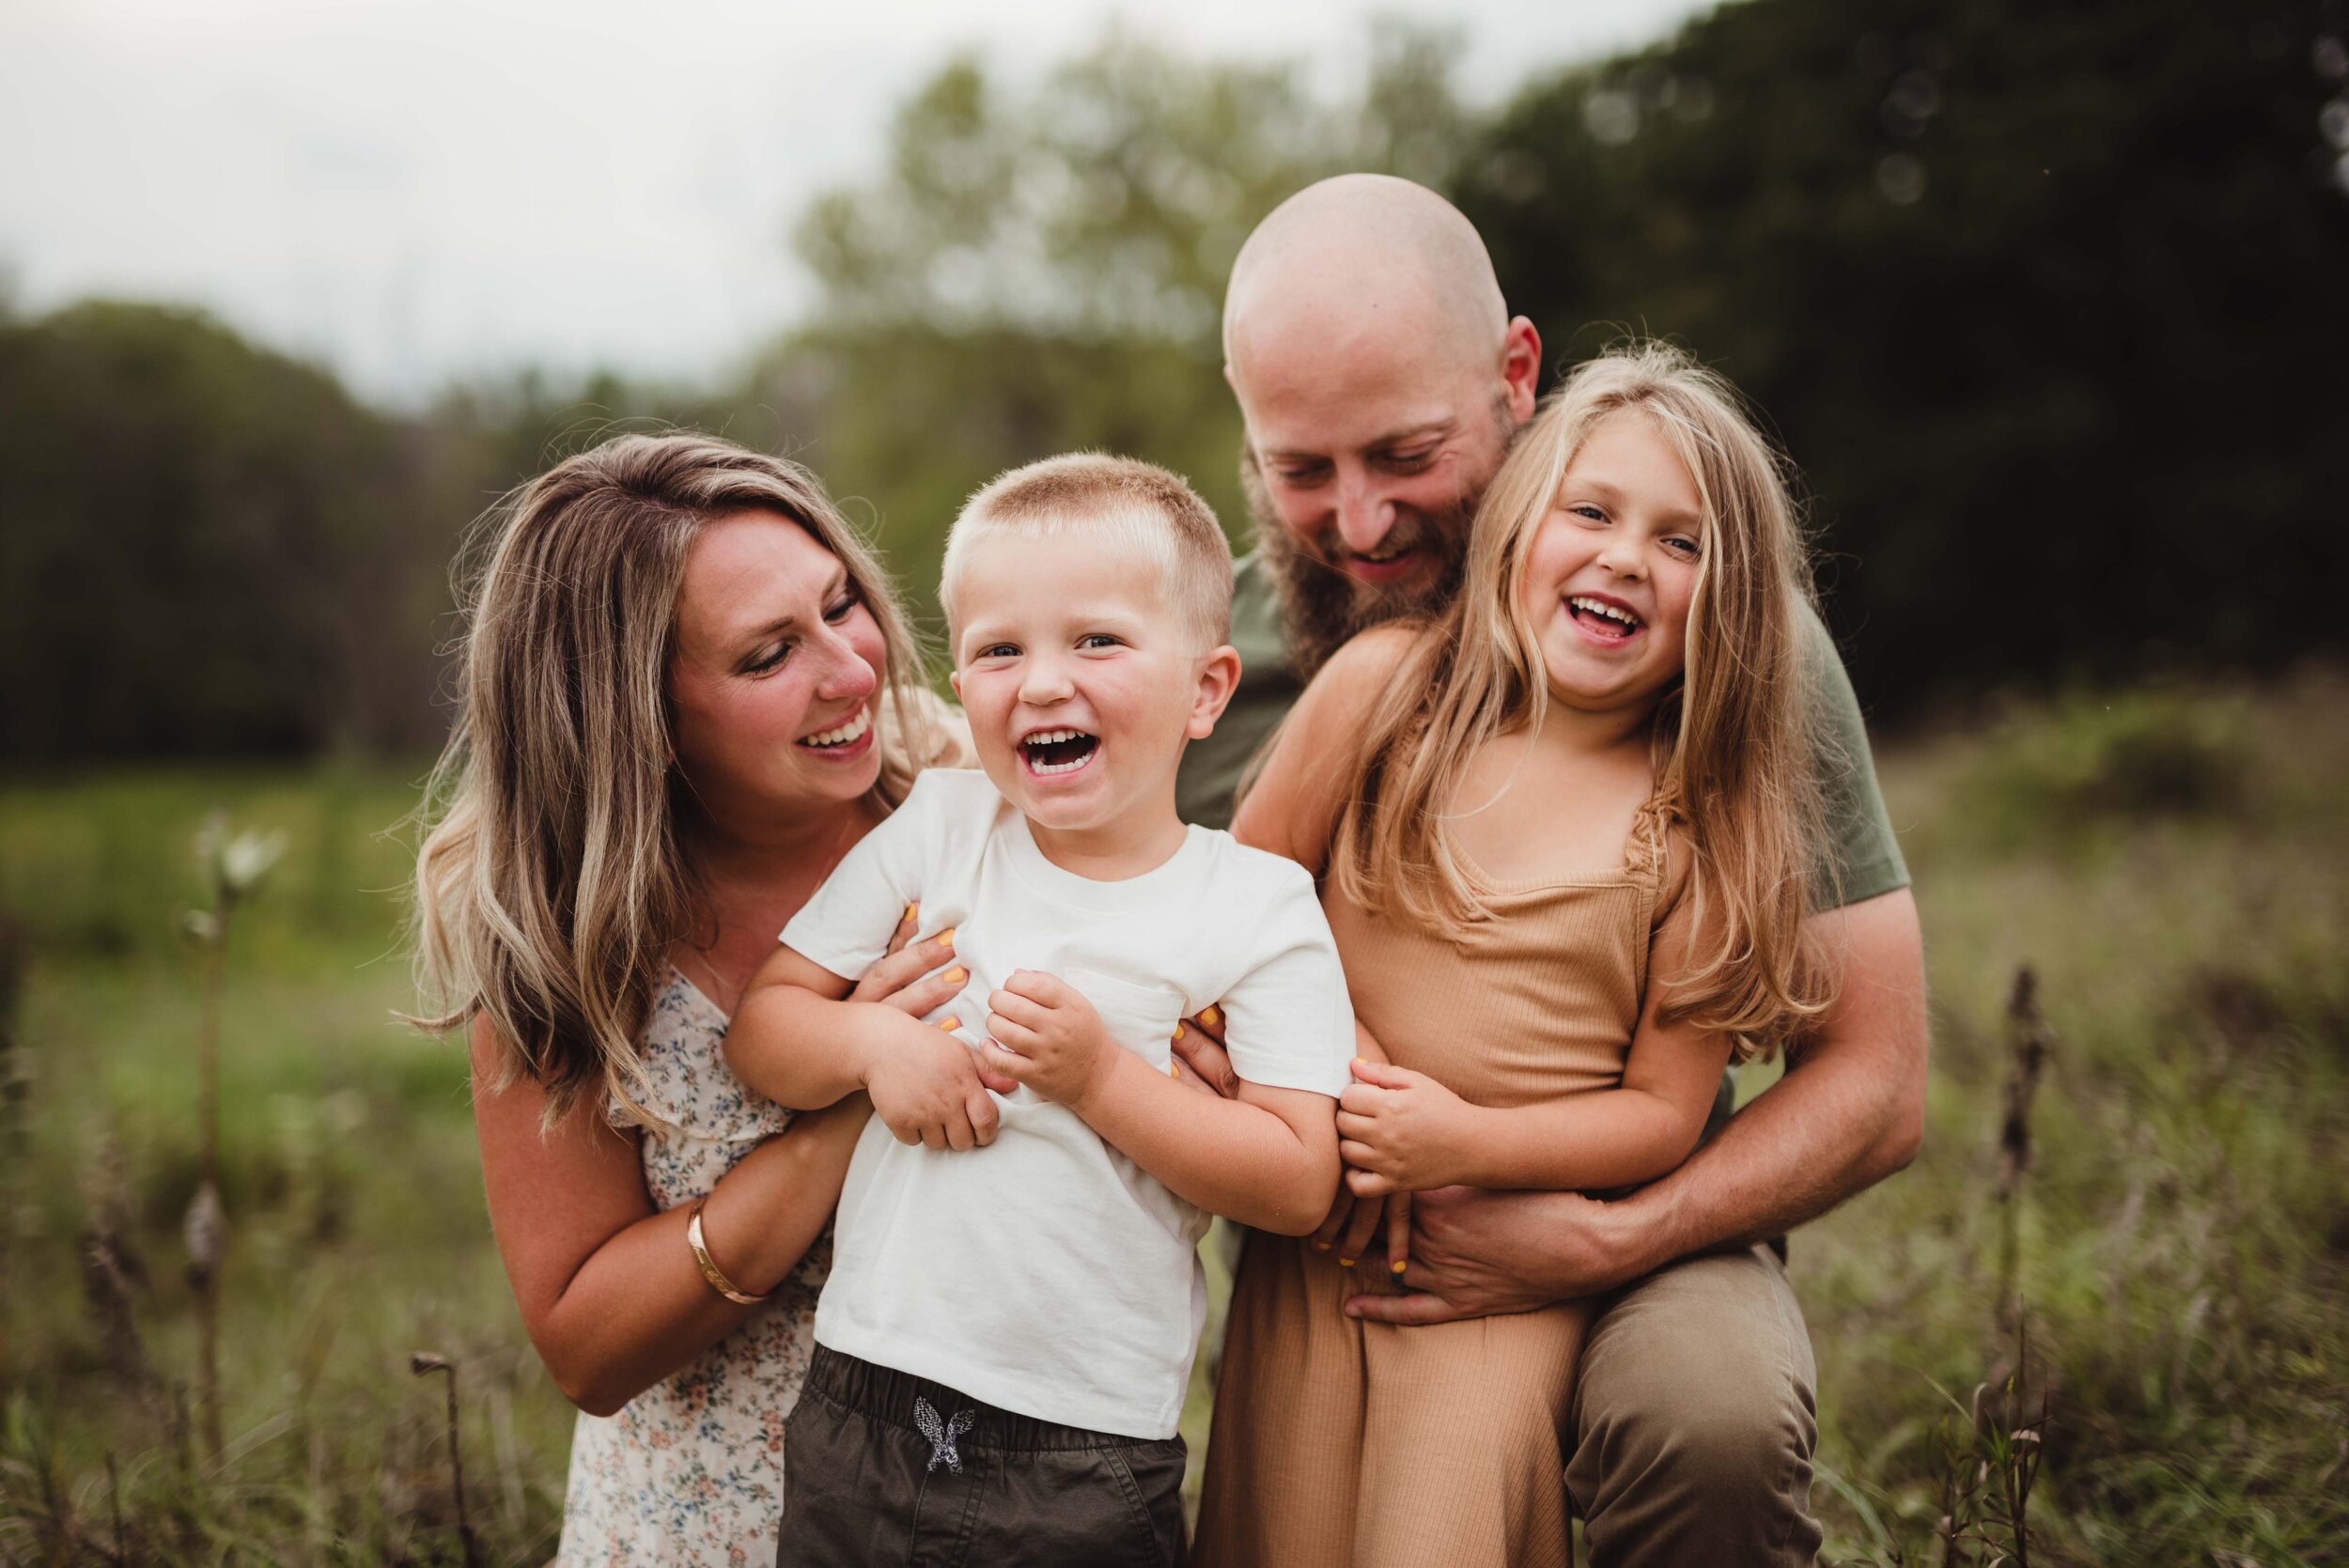 lifestyle family photographer in Lafayette, IN specializing in those candid laughter filled moments.